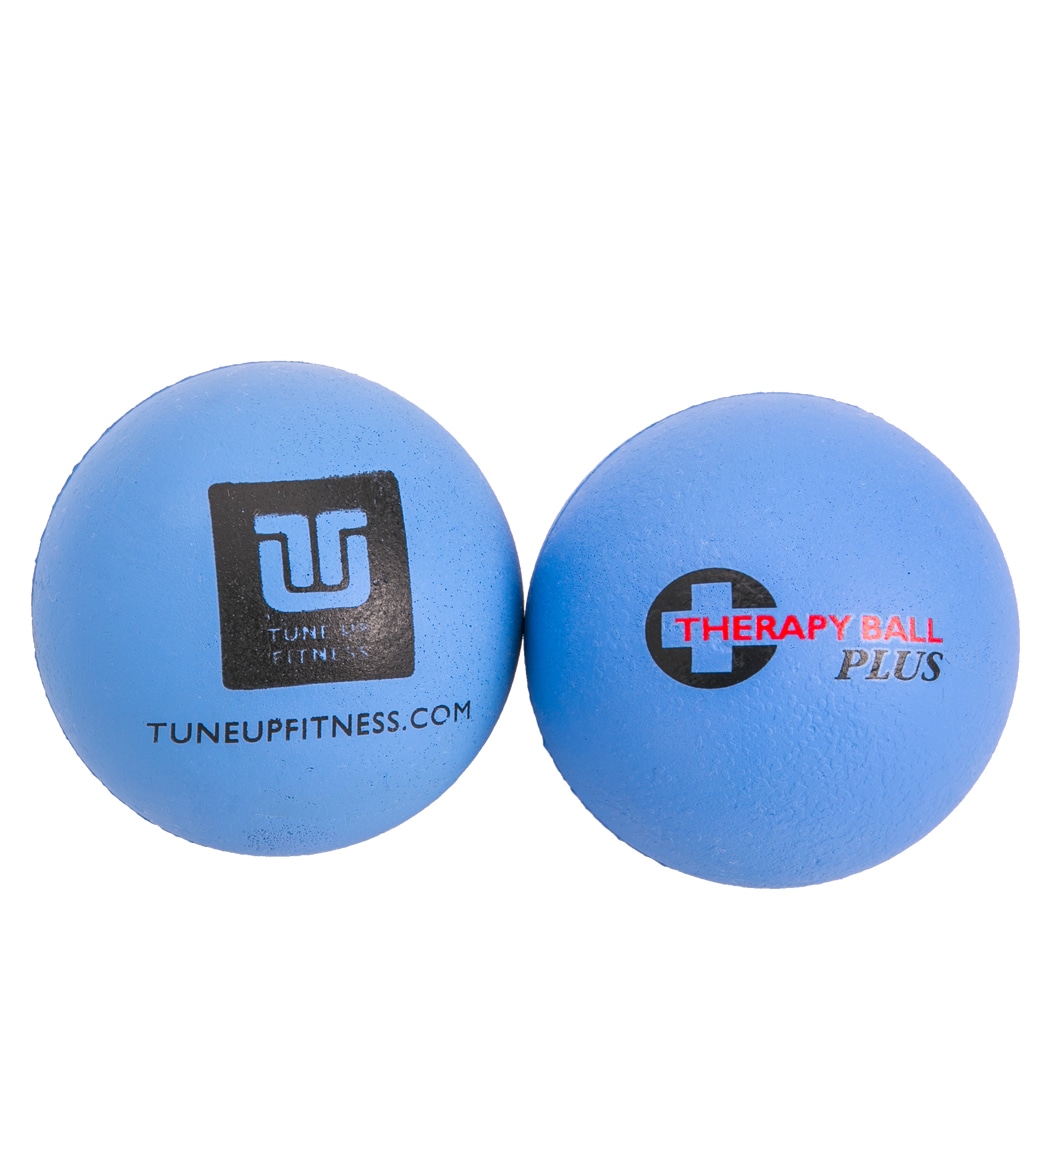 tune up therapy balls